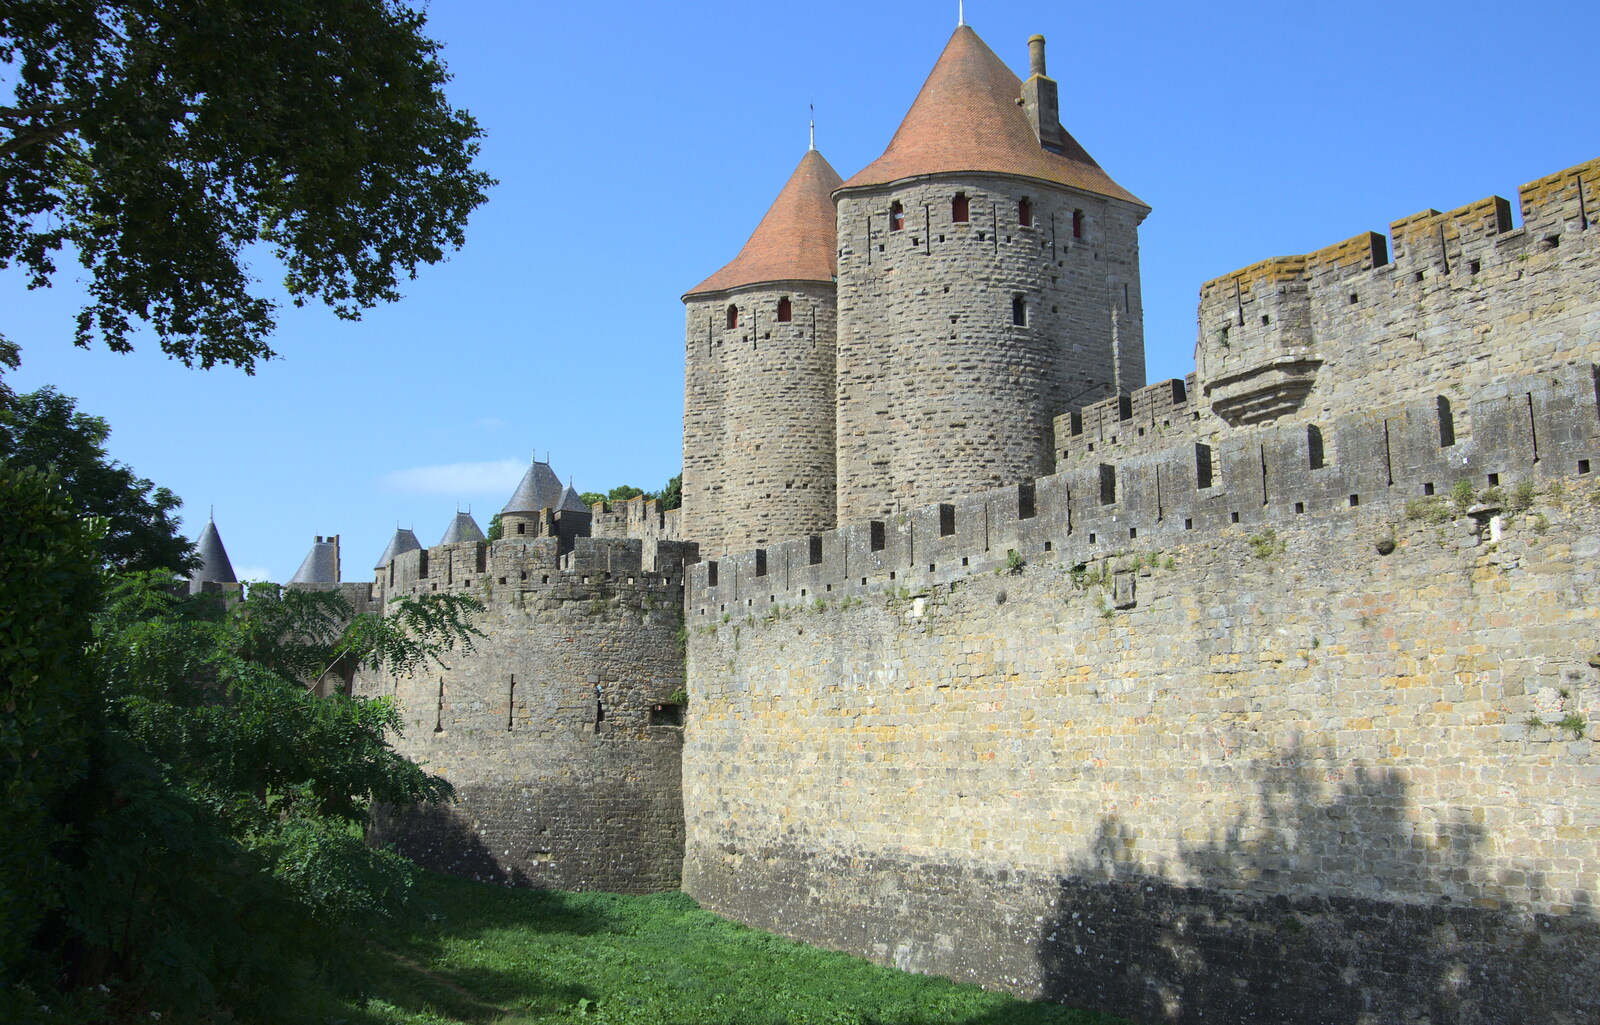 The outside walls of the Cité from A Trip to Carcassonne, Aude, France - 8th August 2018